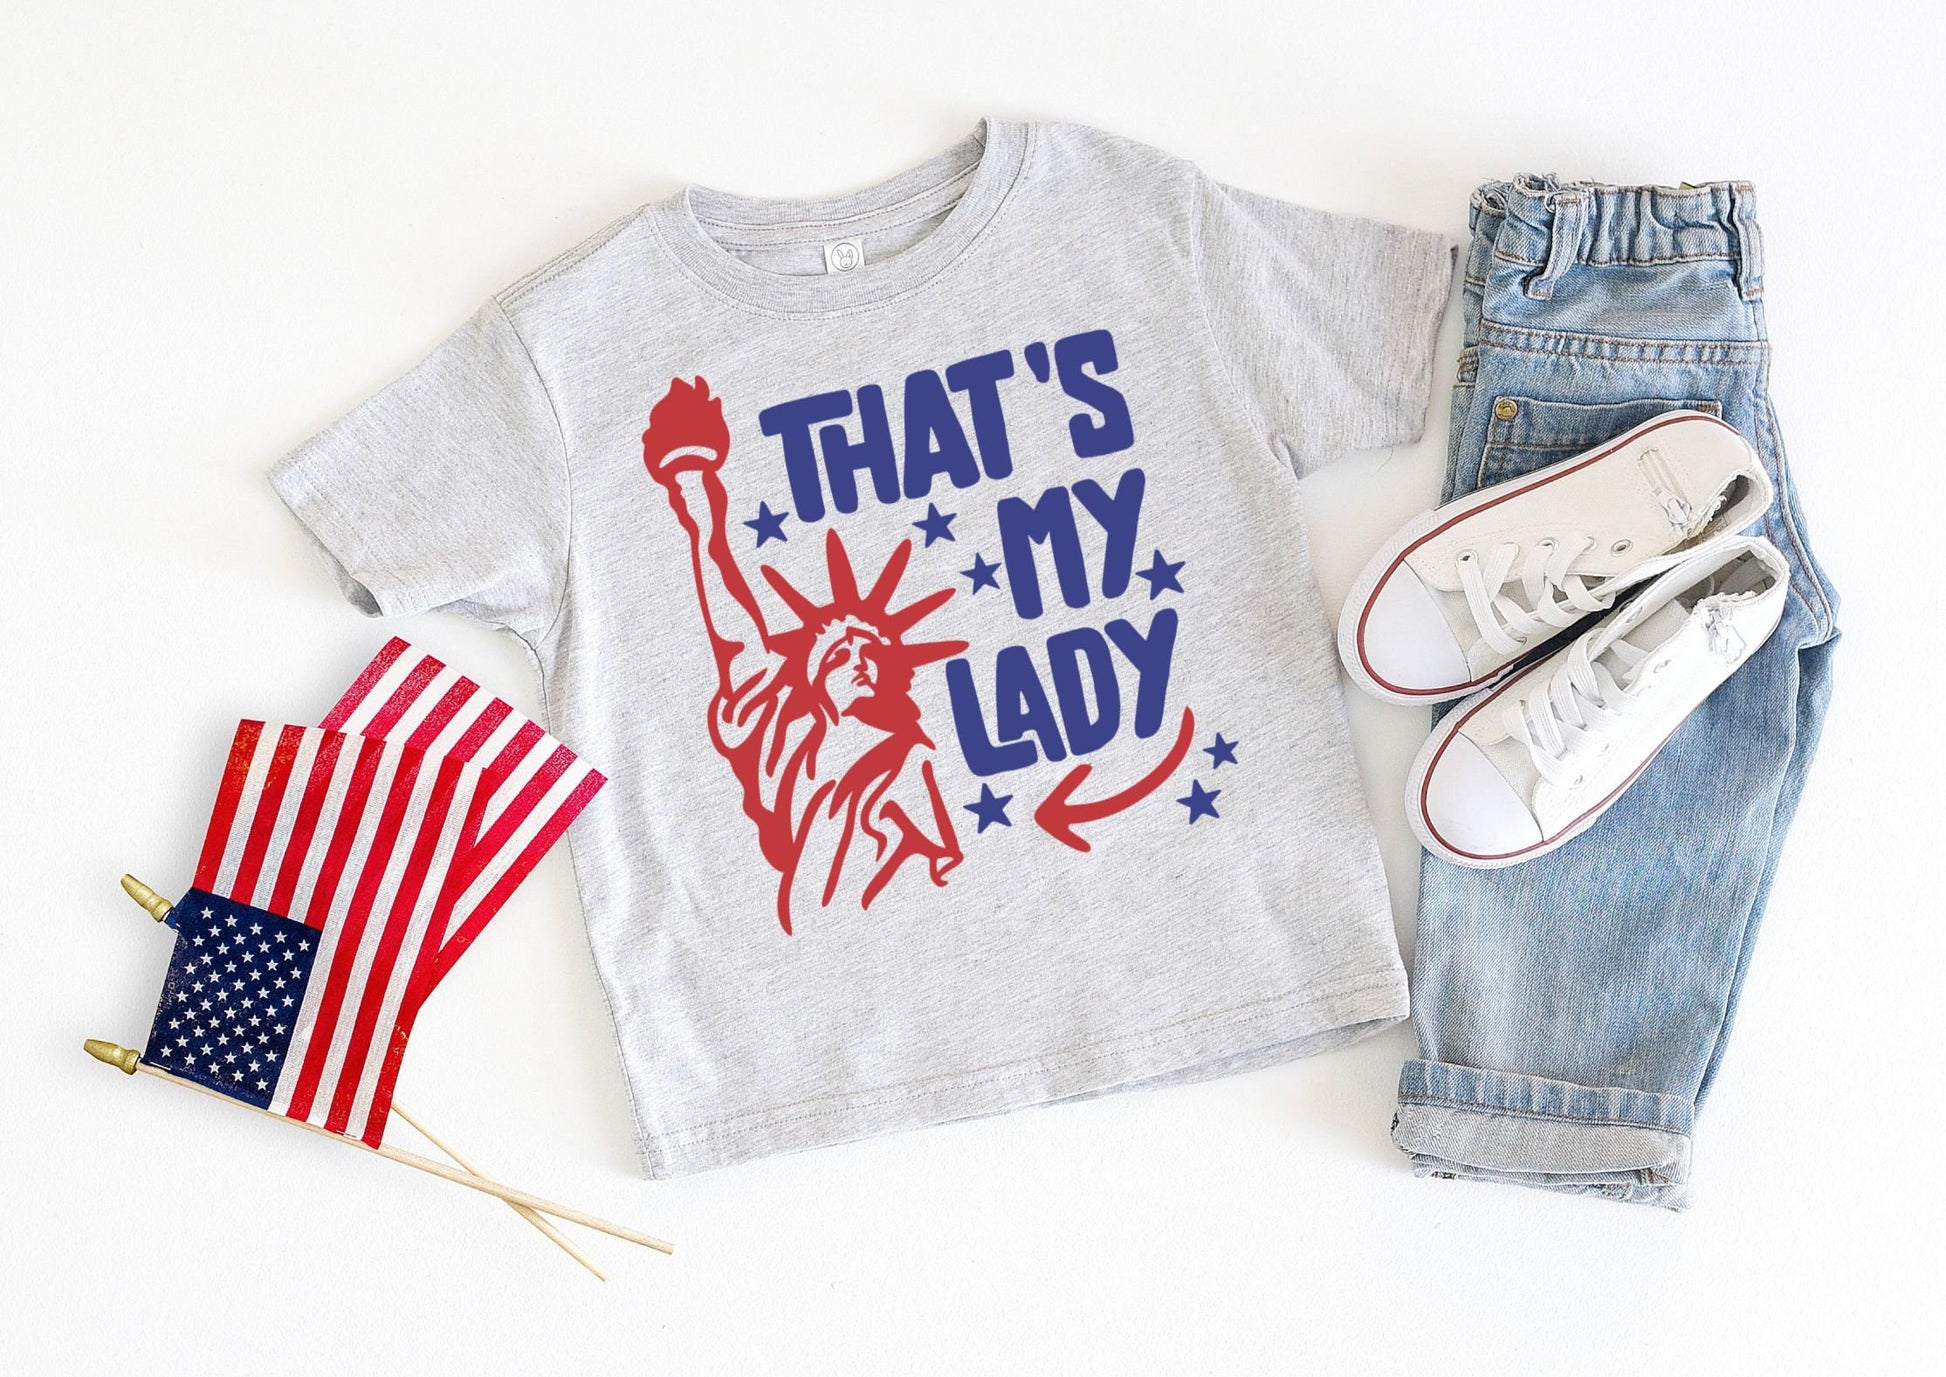 That's My Lady Statue of Liberty Boys Shirt - Toddler 4th of July Shirt - Fourth of July Kids Shirt